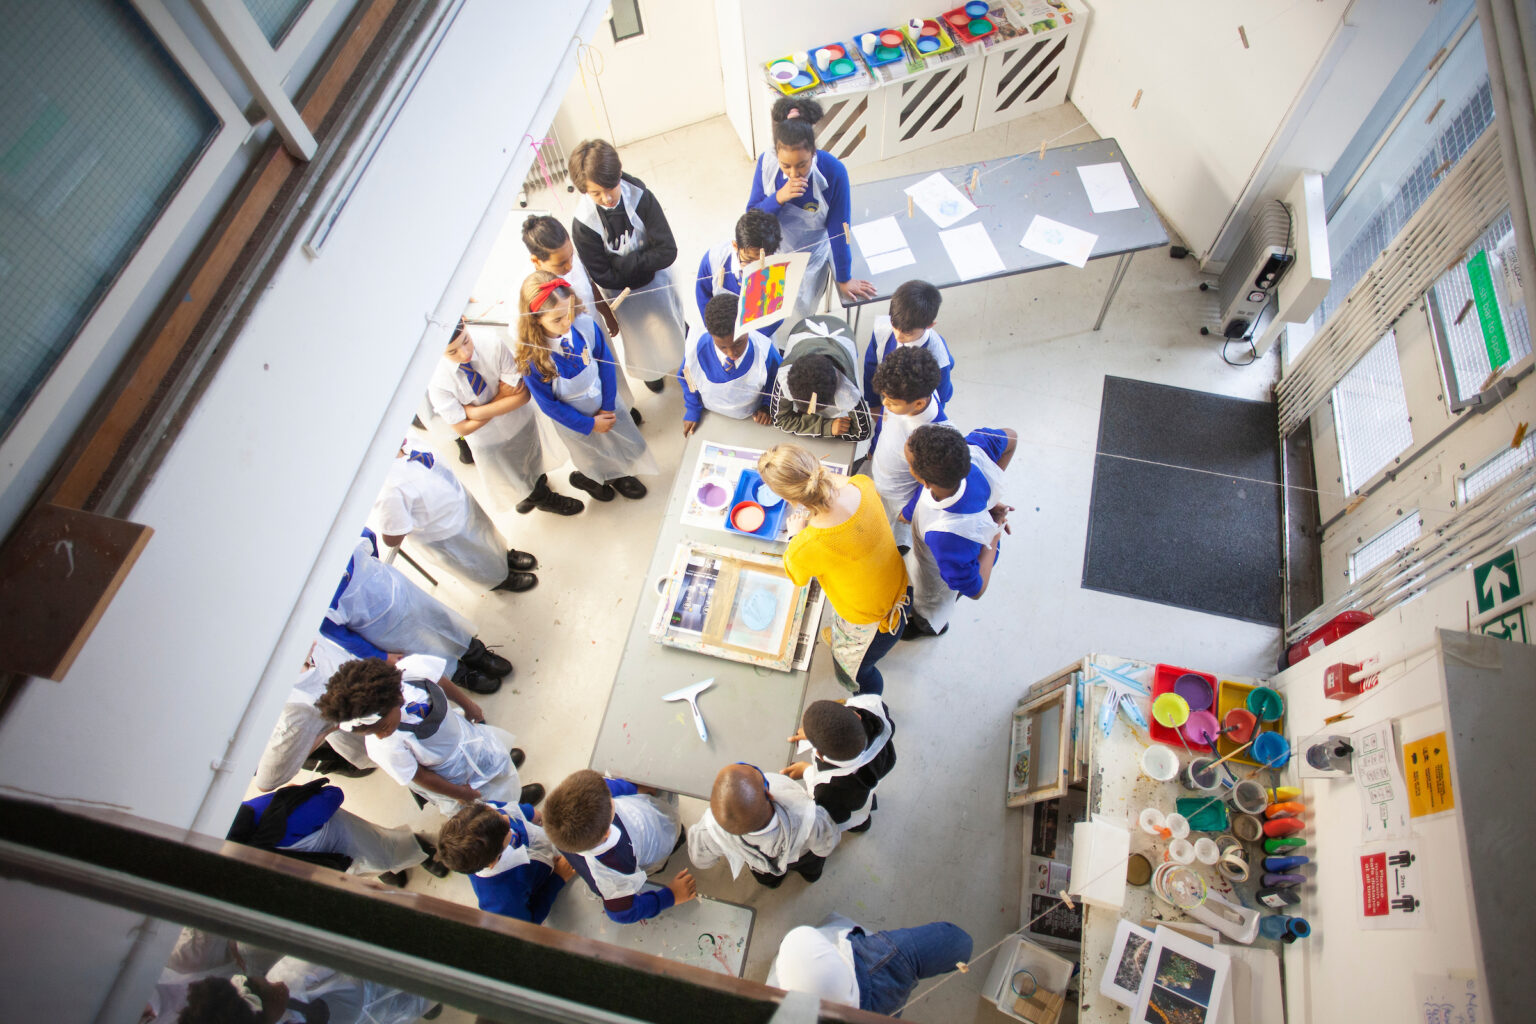 Overhead view of a primary school class watching a screen printing demonstration.